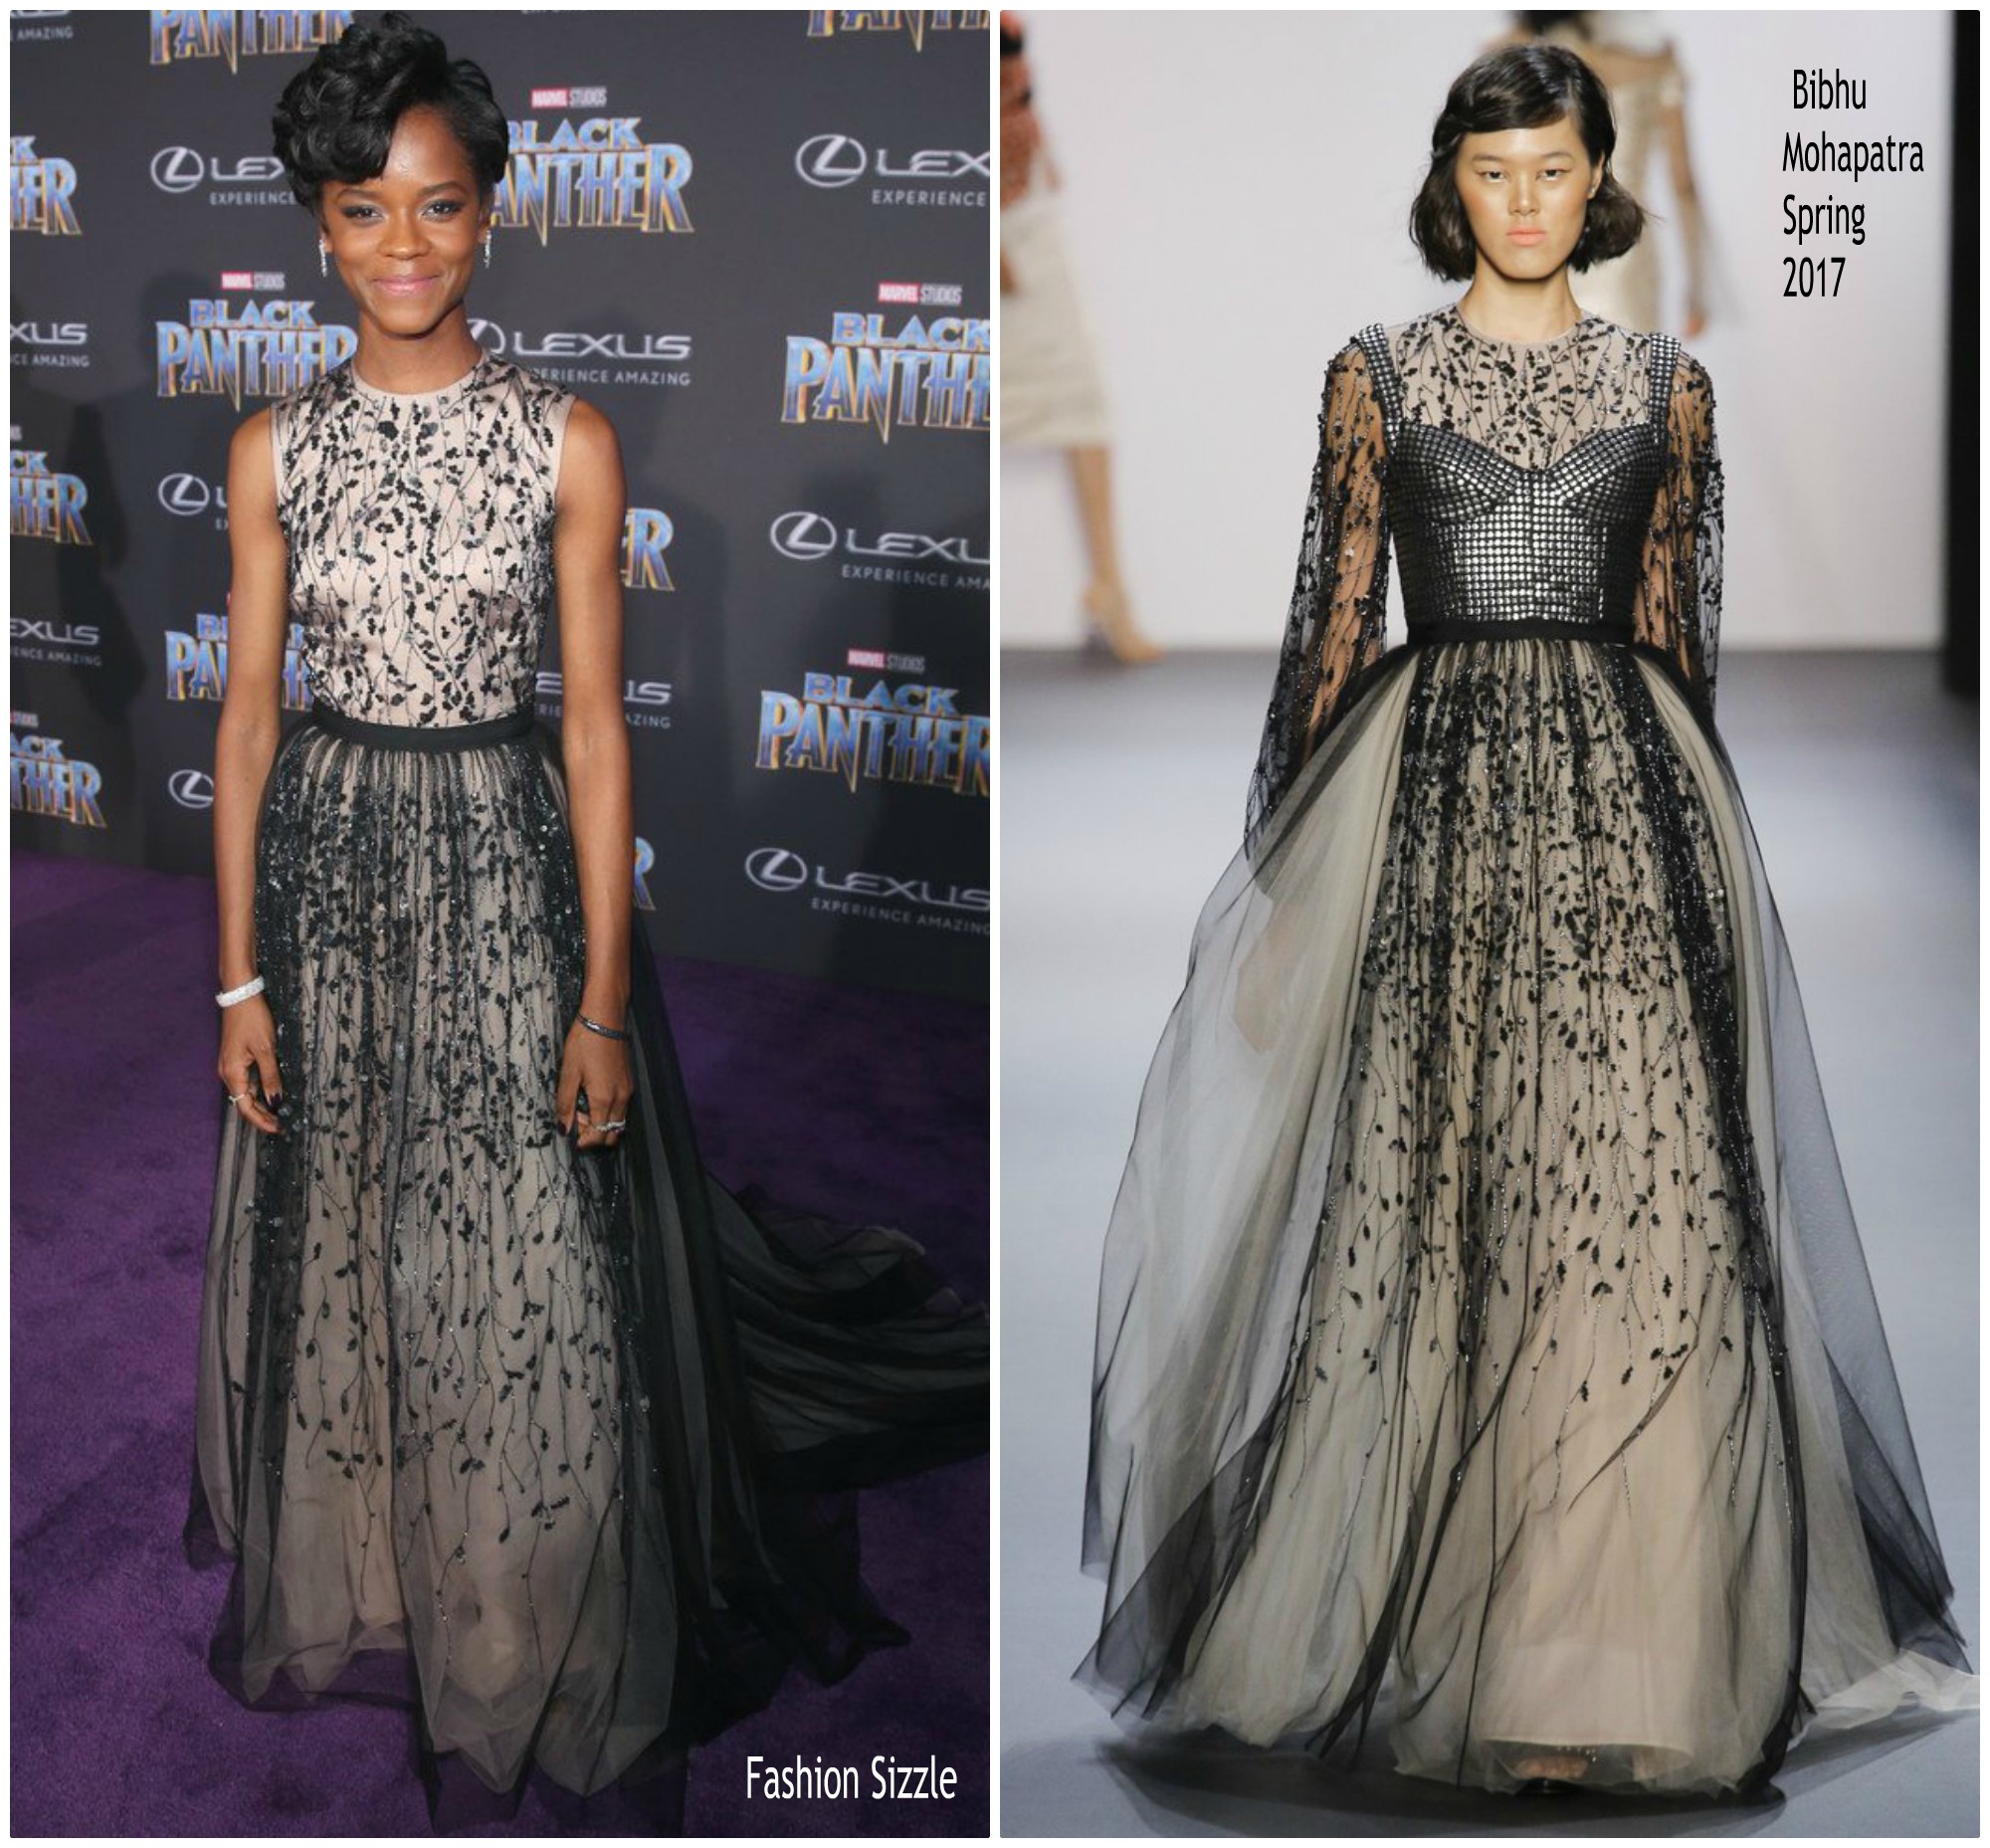 Letitia Wright In Bibhu Mohapatra Black Panther World Premiere